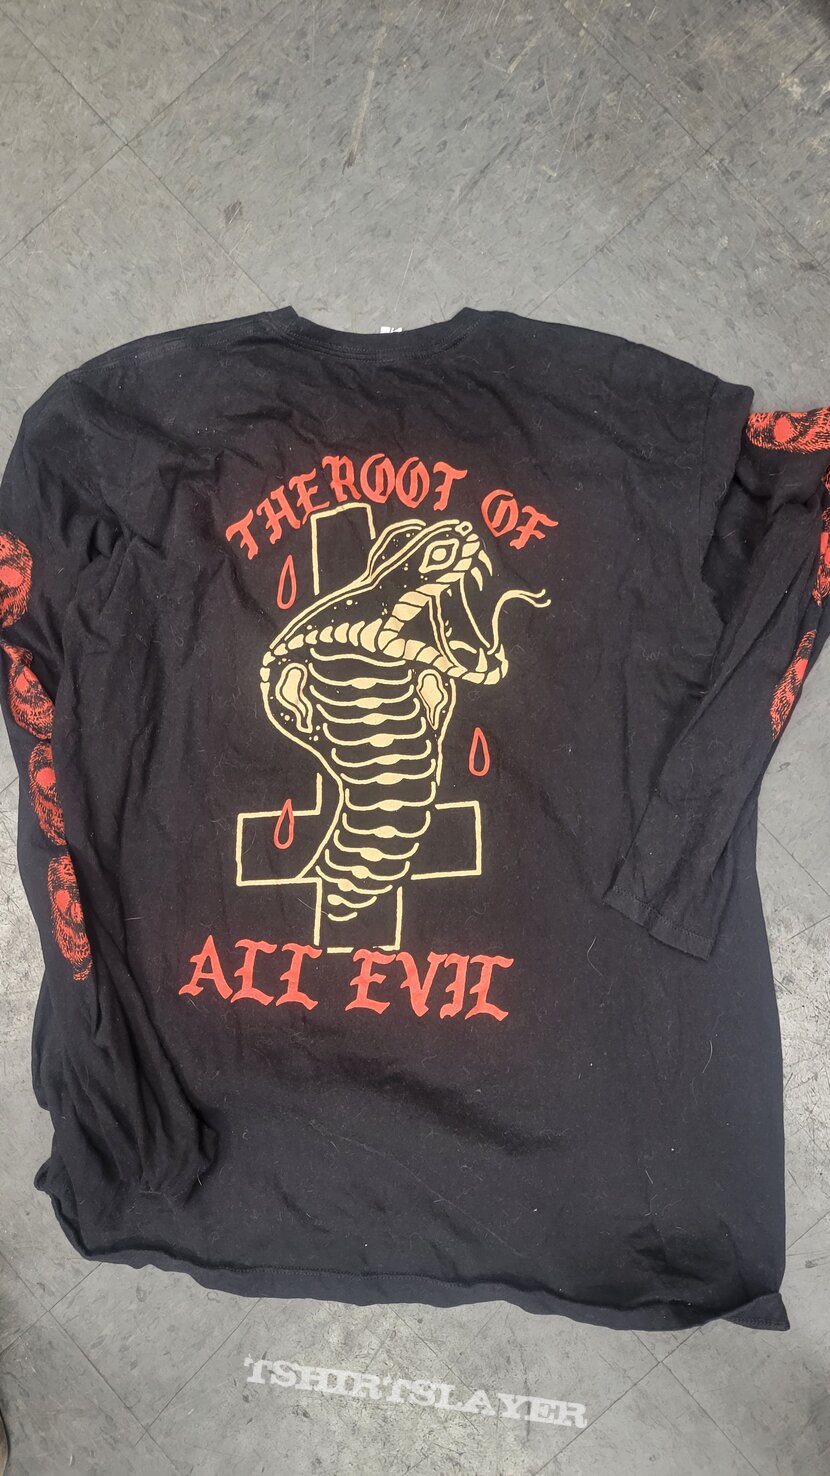 Spite &quot;The Root Of All Evil&quot; longsleeve shirt